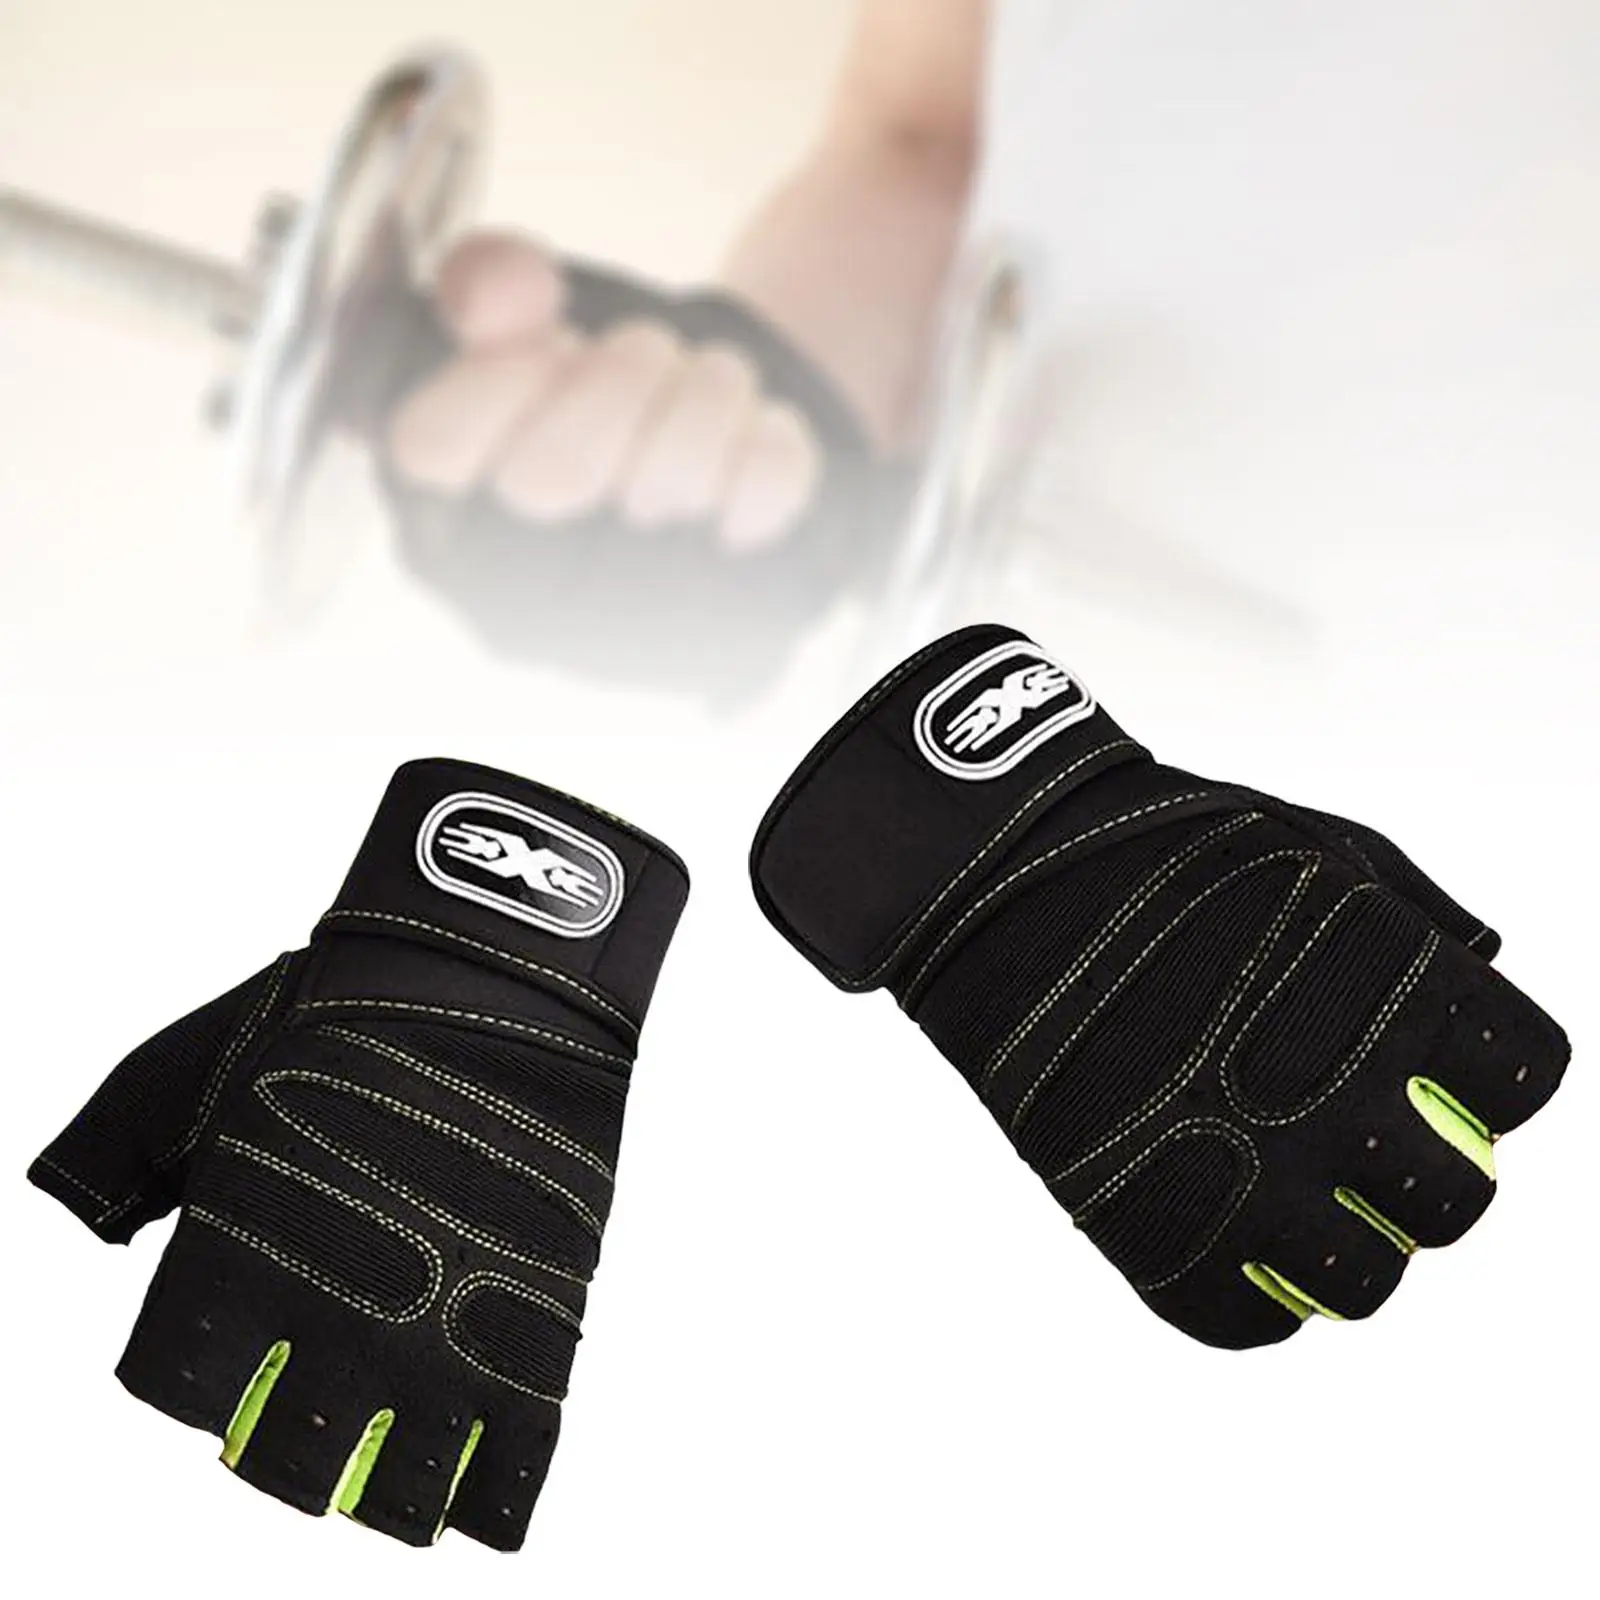 Weight Lifting Gloves Nonslip Wrist Support Training Gloves Gym Gloves for